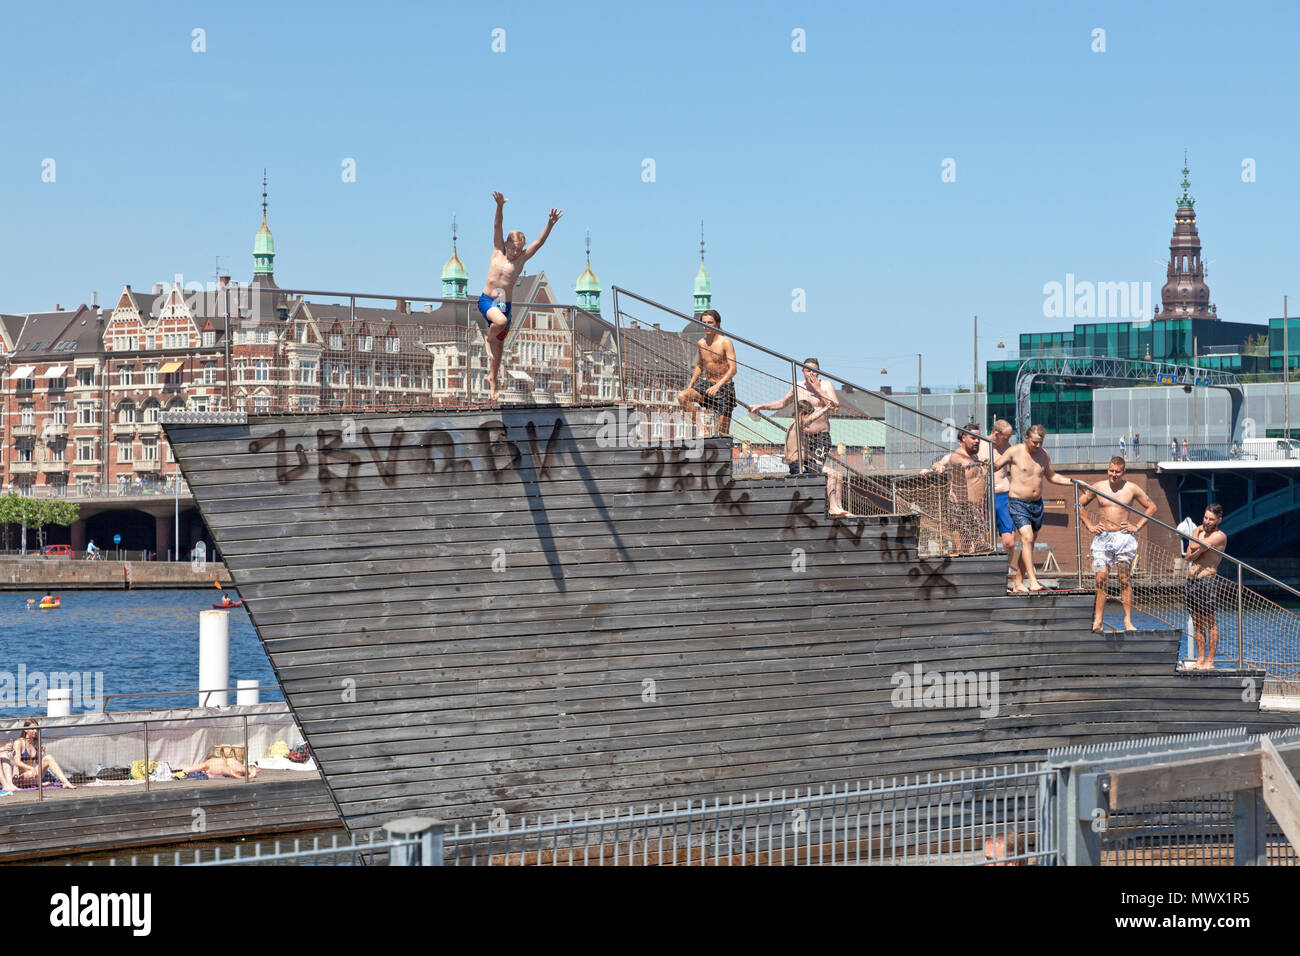 Copenhagen, Denmark. 2nd June, 2018. On the second day the harbour bath season that began yesterday thousands of Copenhageners, tourists and visitors enjoy another warm and sunny summer day the